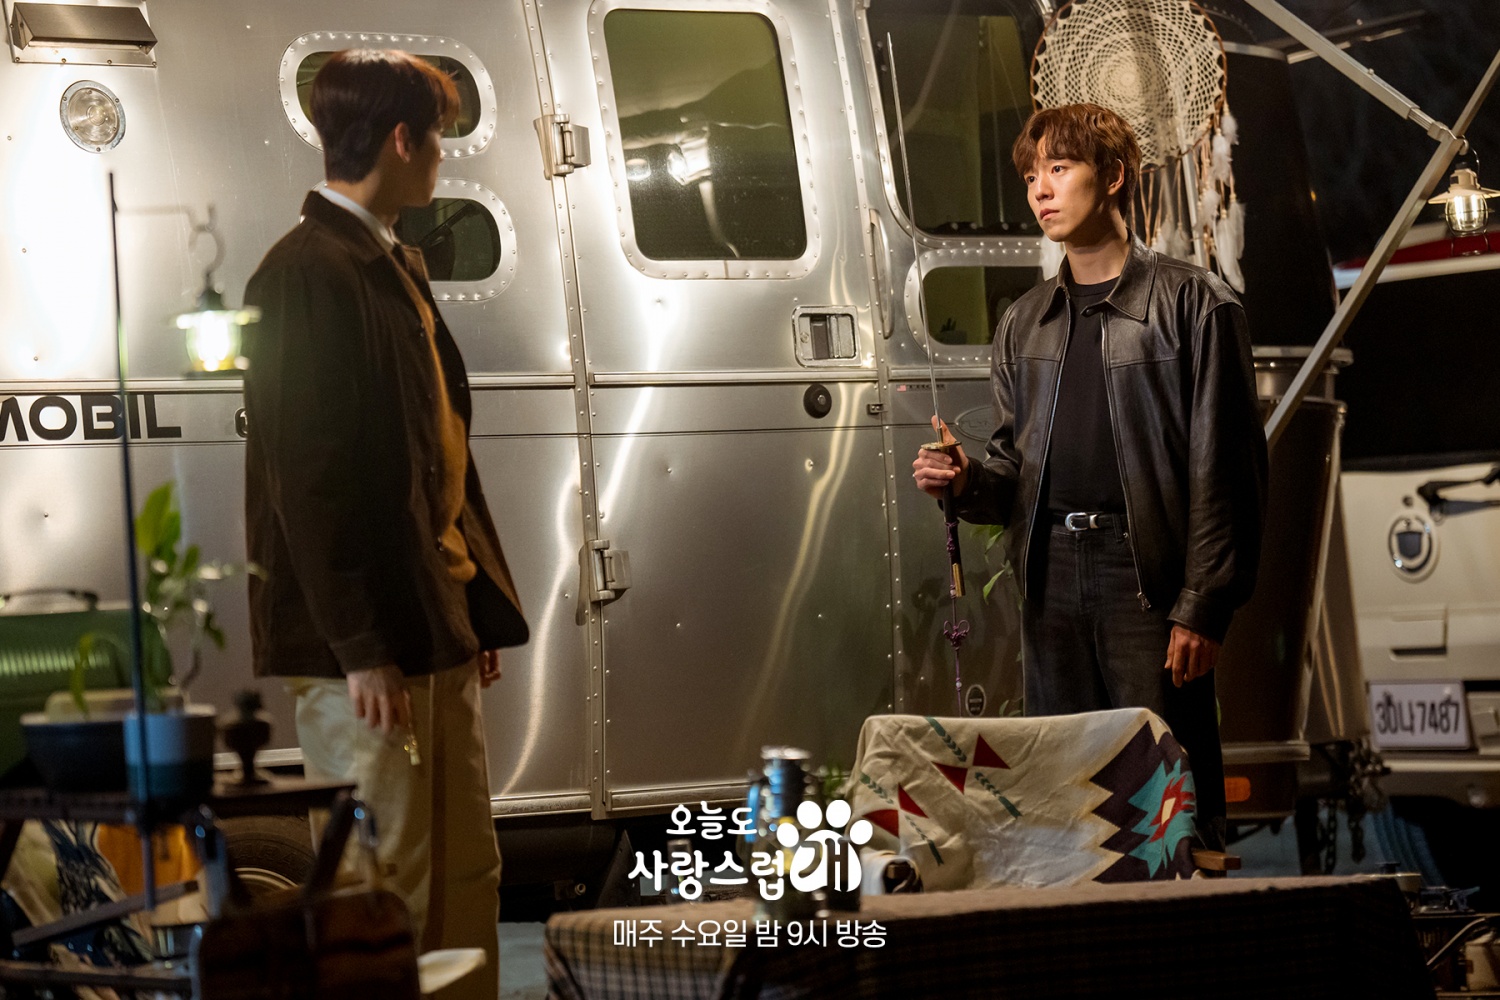 A Good Day To Be a Dog Episode 10 Trailer: Cha Eun-Woo, Park Gyu-Young Get  Suspicious of Lee Hyun-Woo